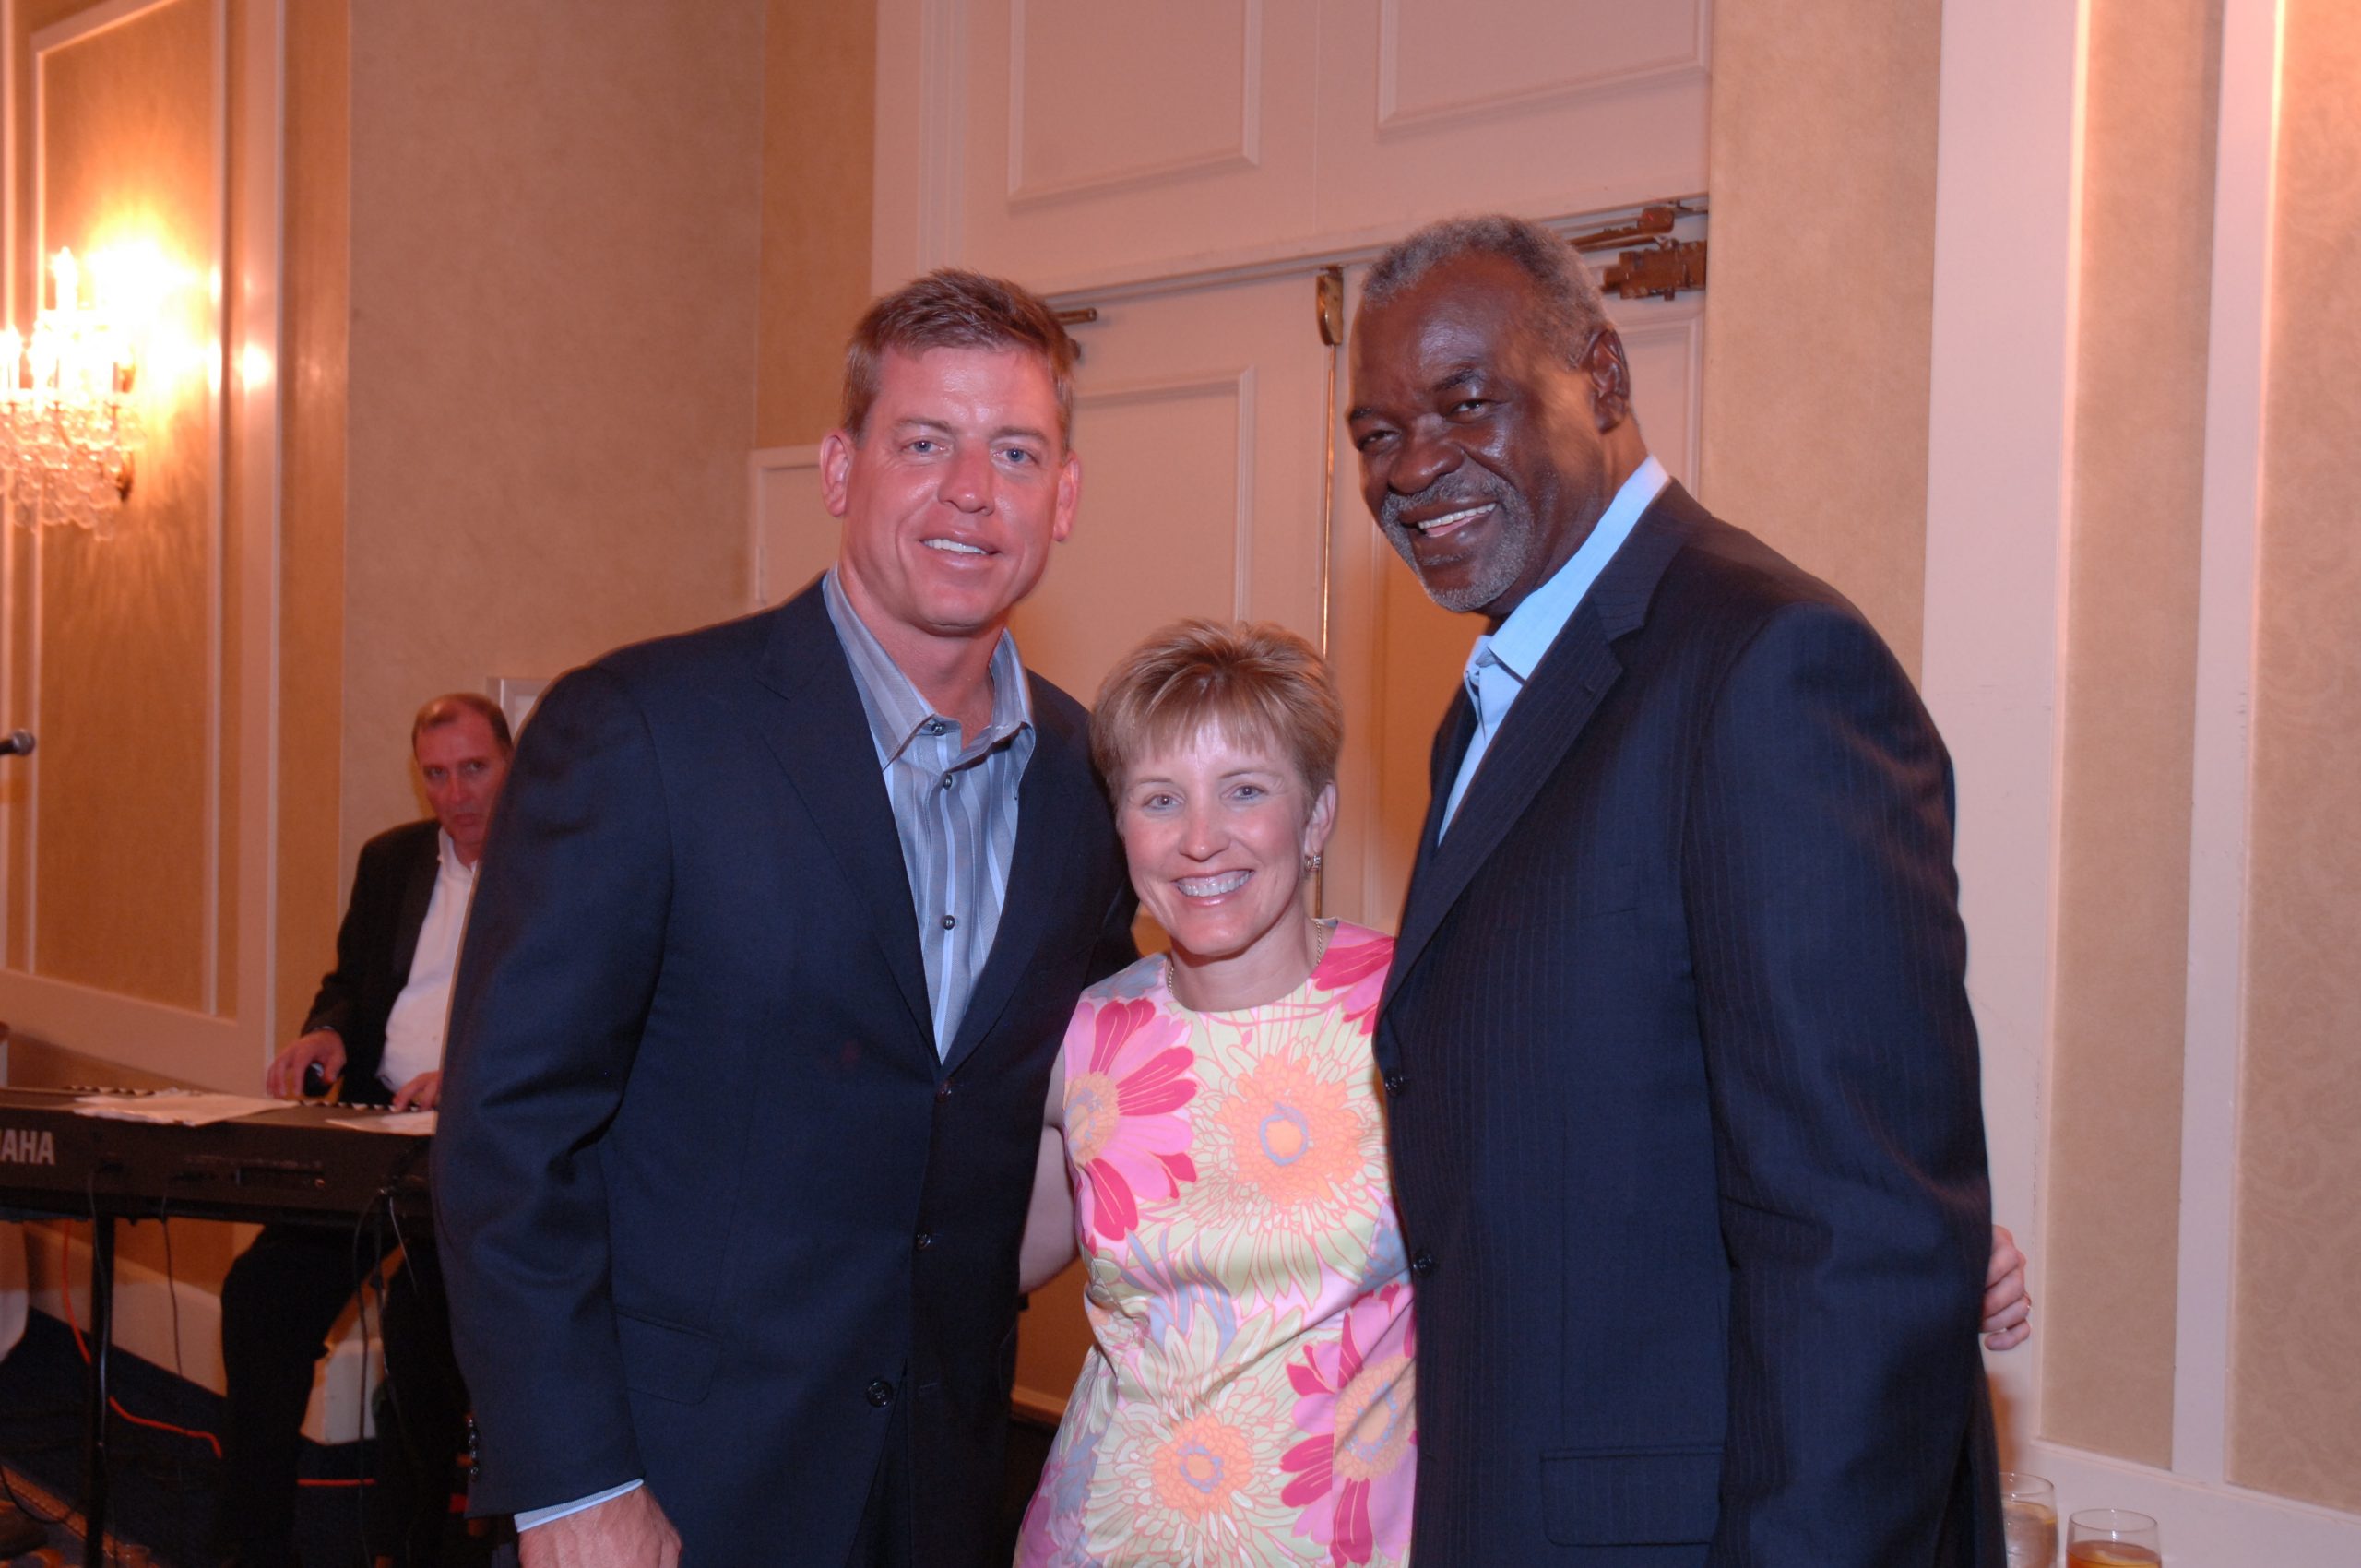 Charean Williams poses for a photo with Troy Aikman.